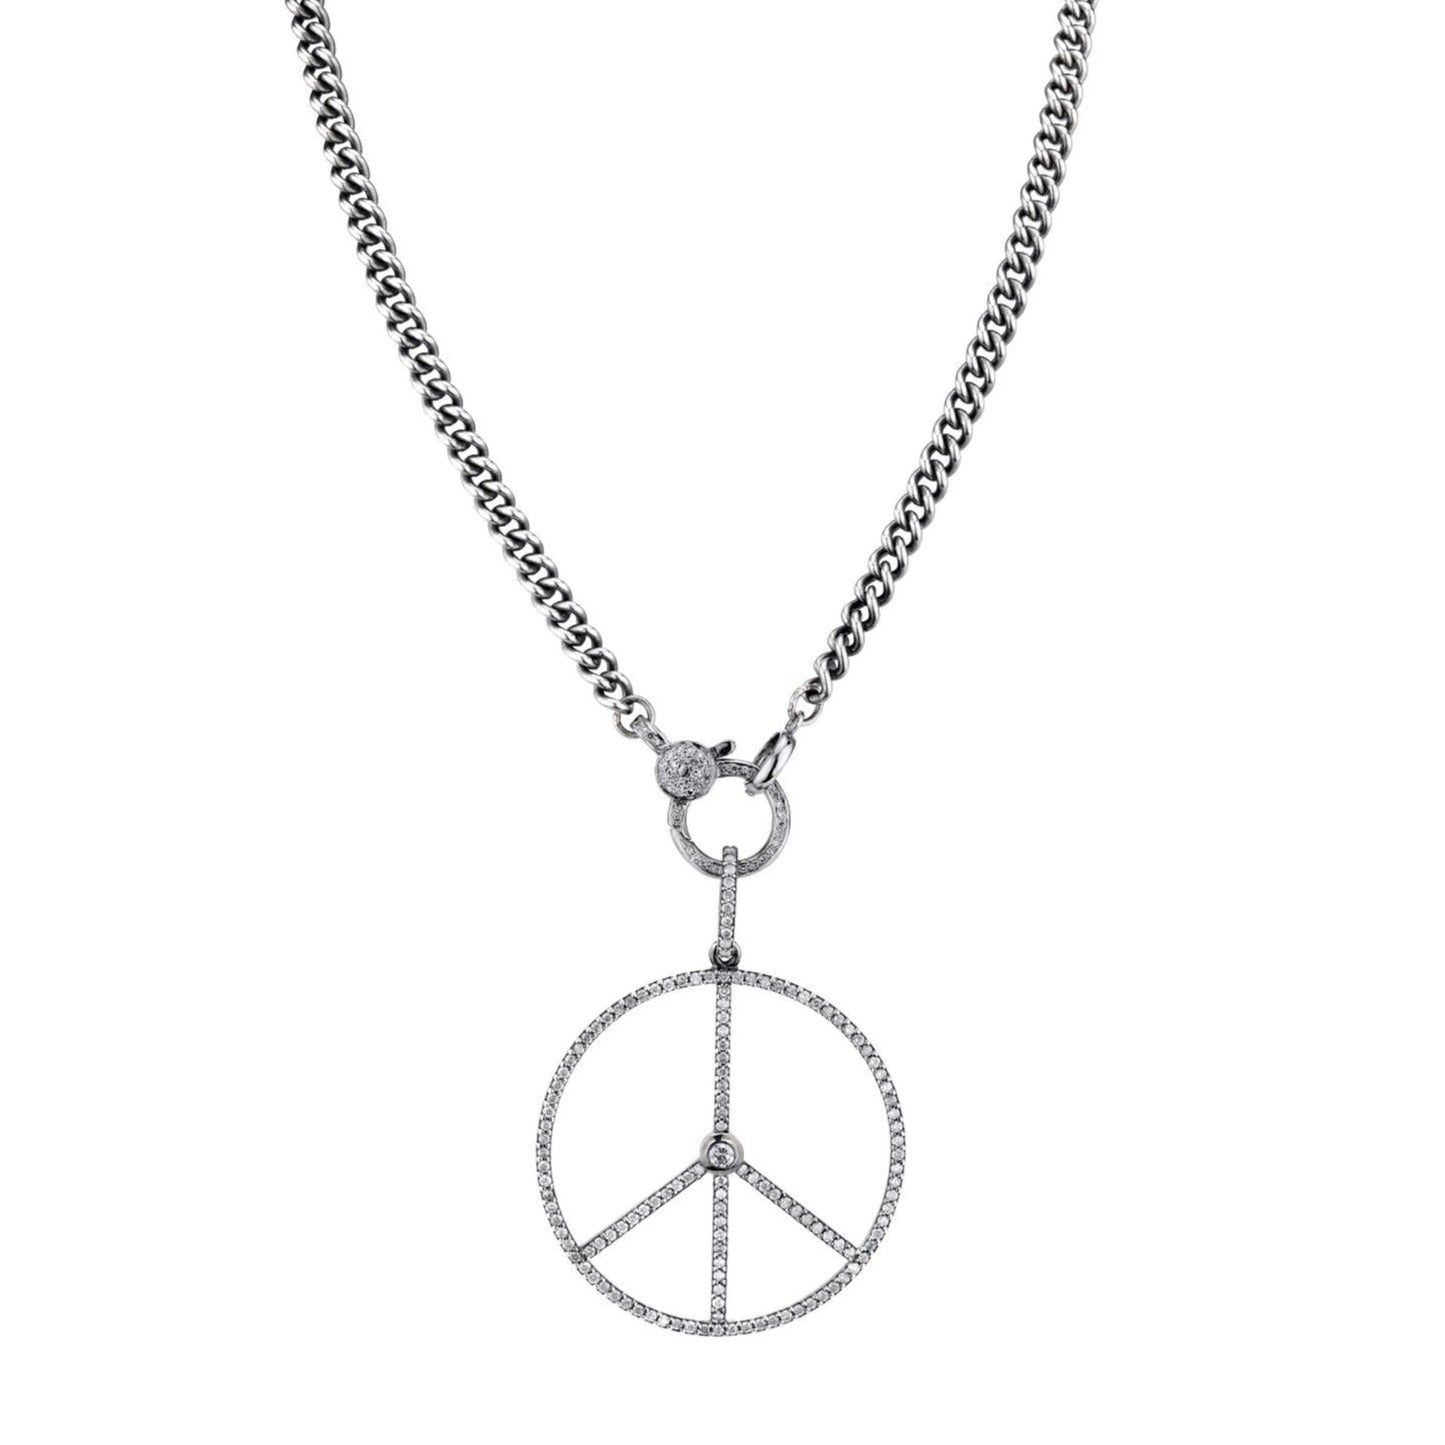 Diamond Peace Sign Pendant Necklace – 39 Inches - 1.72 Carats – Sheryl Lowe